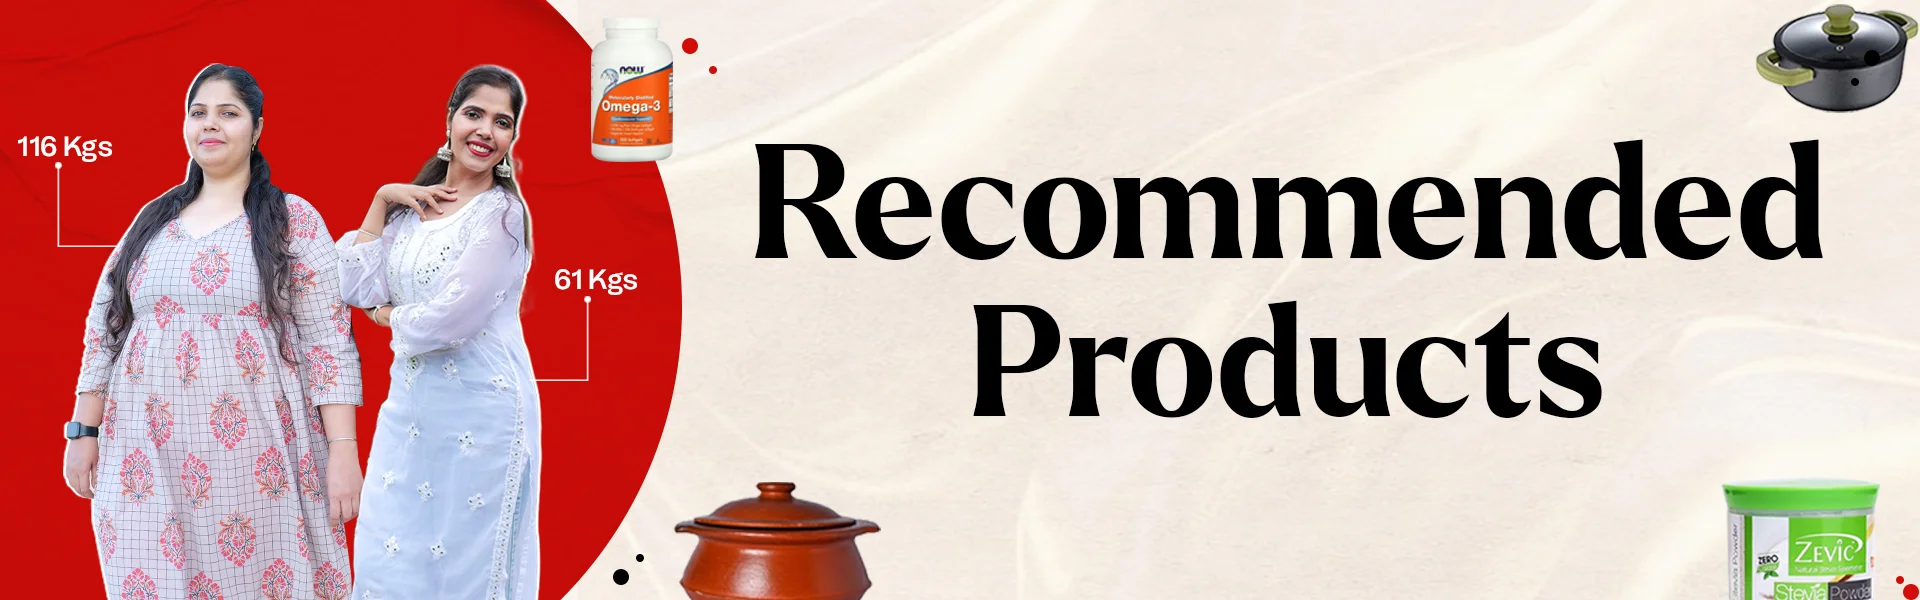 recommended-products